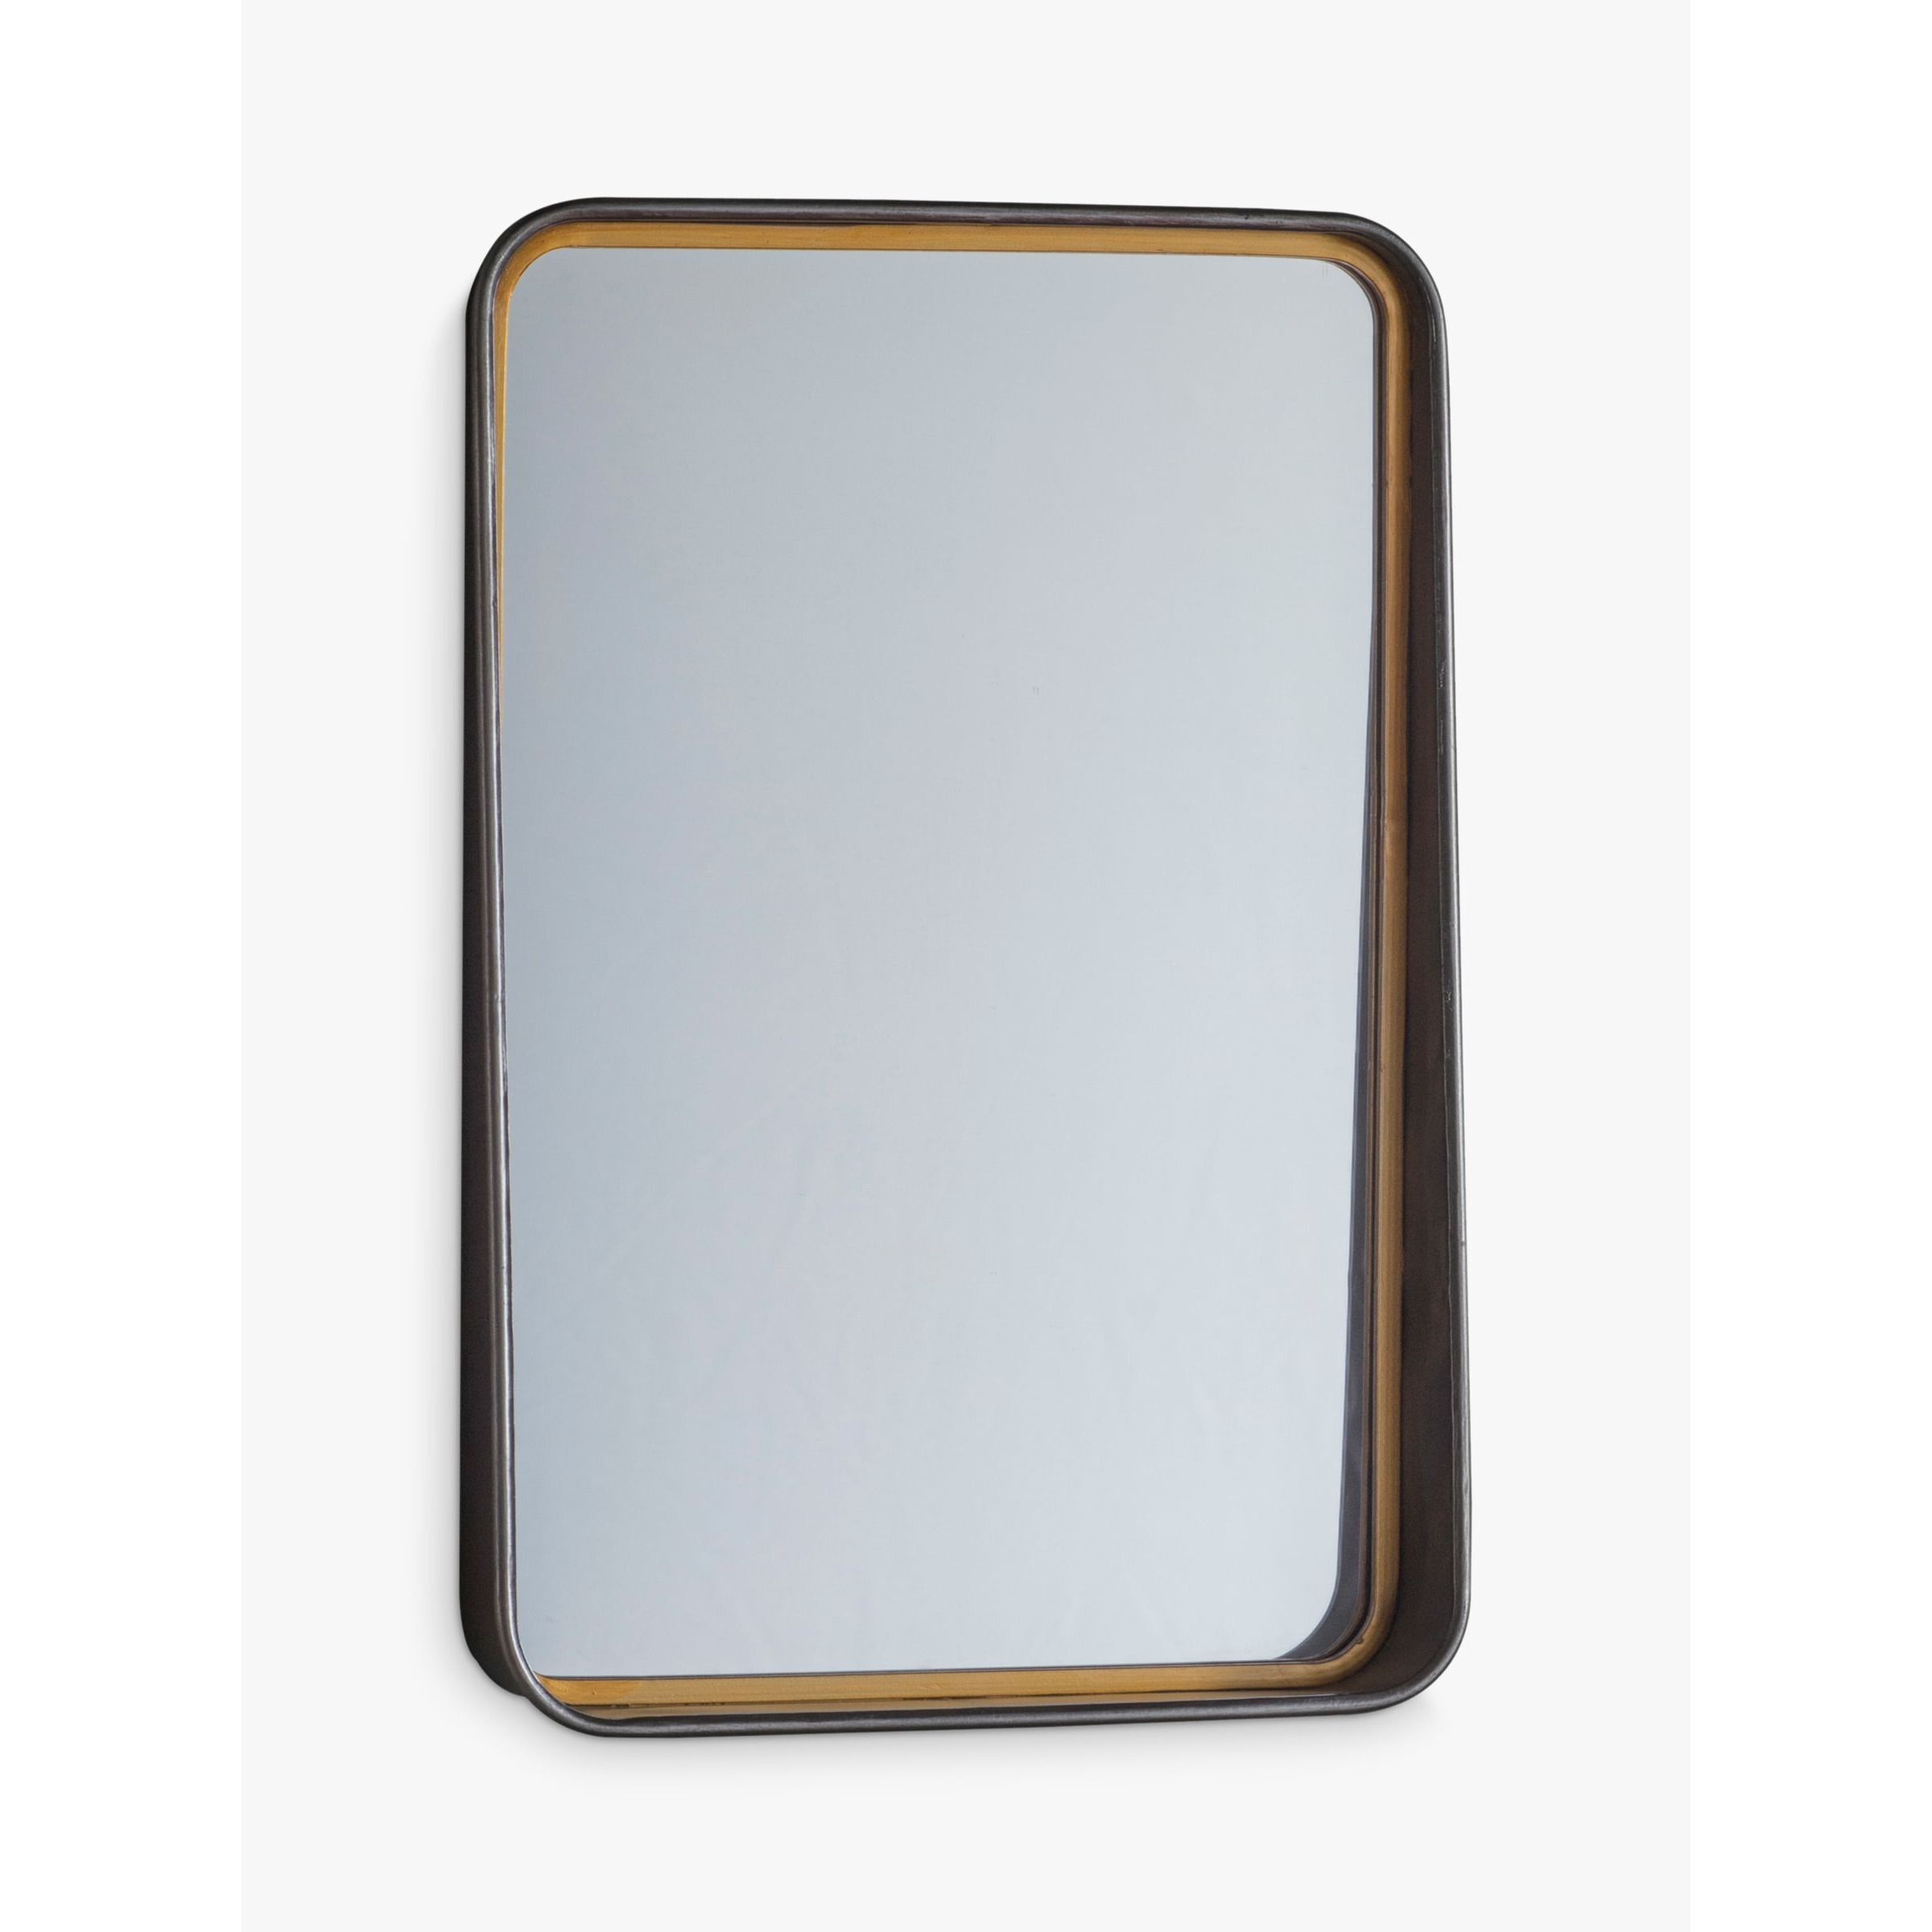 Gallery Direct Earl Rectangular Rounded Corners Metal Frame Mirror, 62 x 41.5cm, Bronze/Gold - image 1